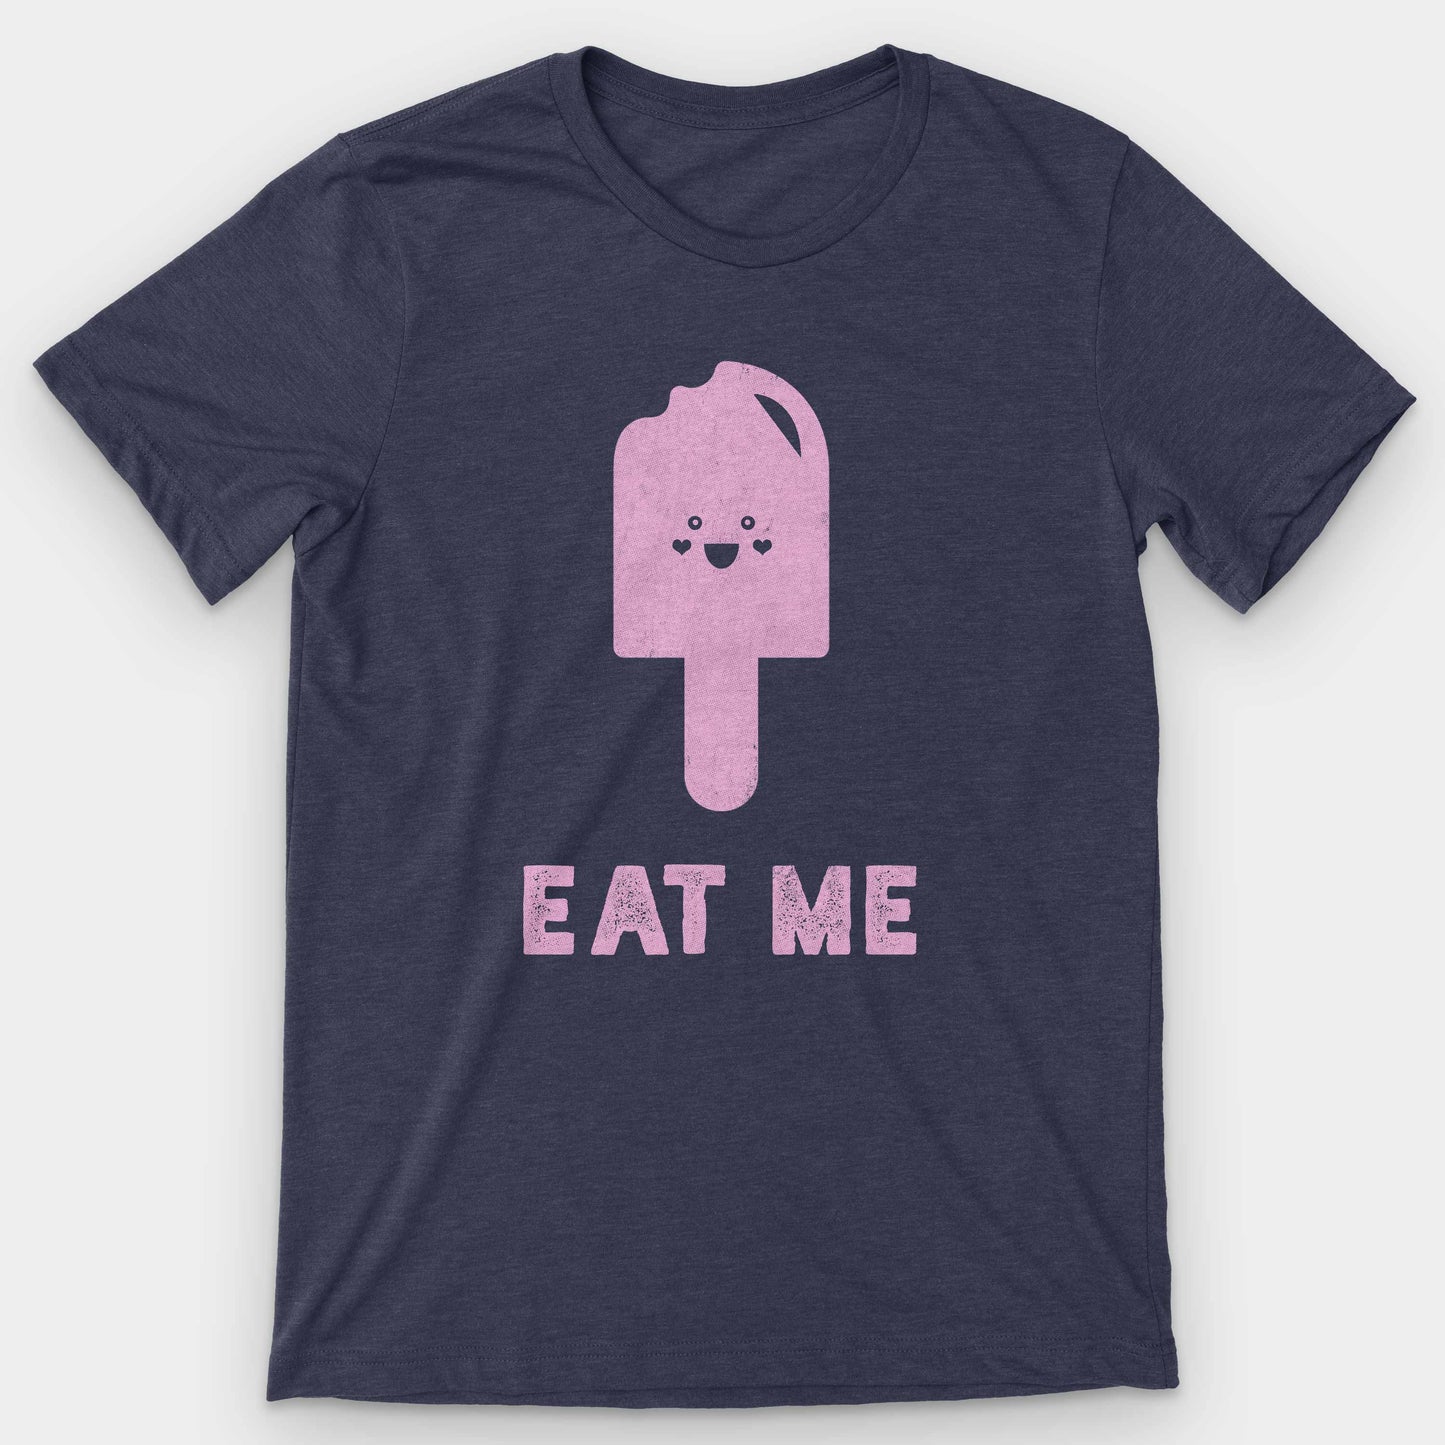 Heather Midnight Navy Eat Me Graphic T-Shirt by Snaxtime